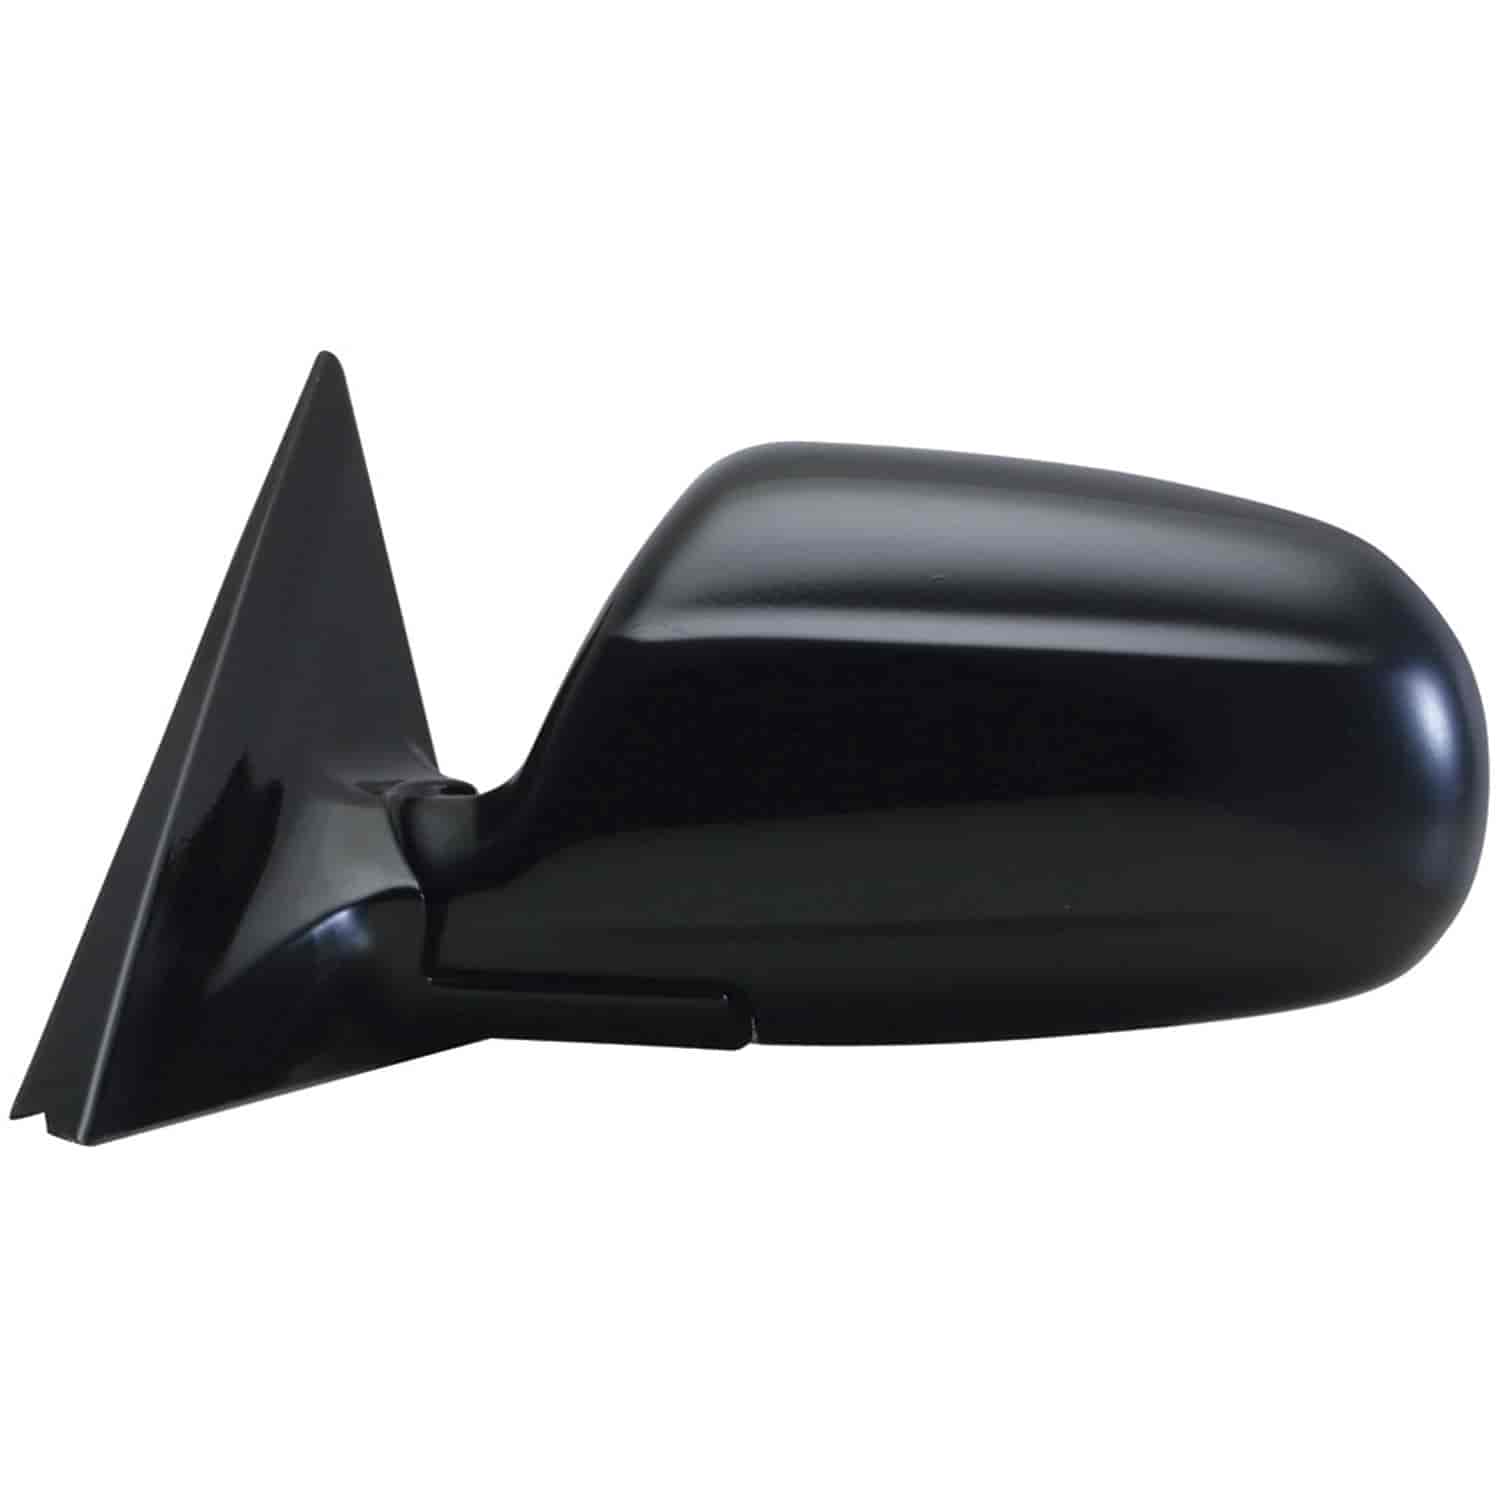 OEM Style Replacement mirror for 94-01 ACURA Integra GS LS GS-R SE type R driver side mirror tested